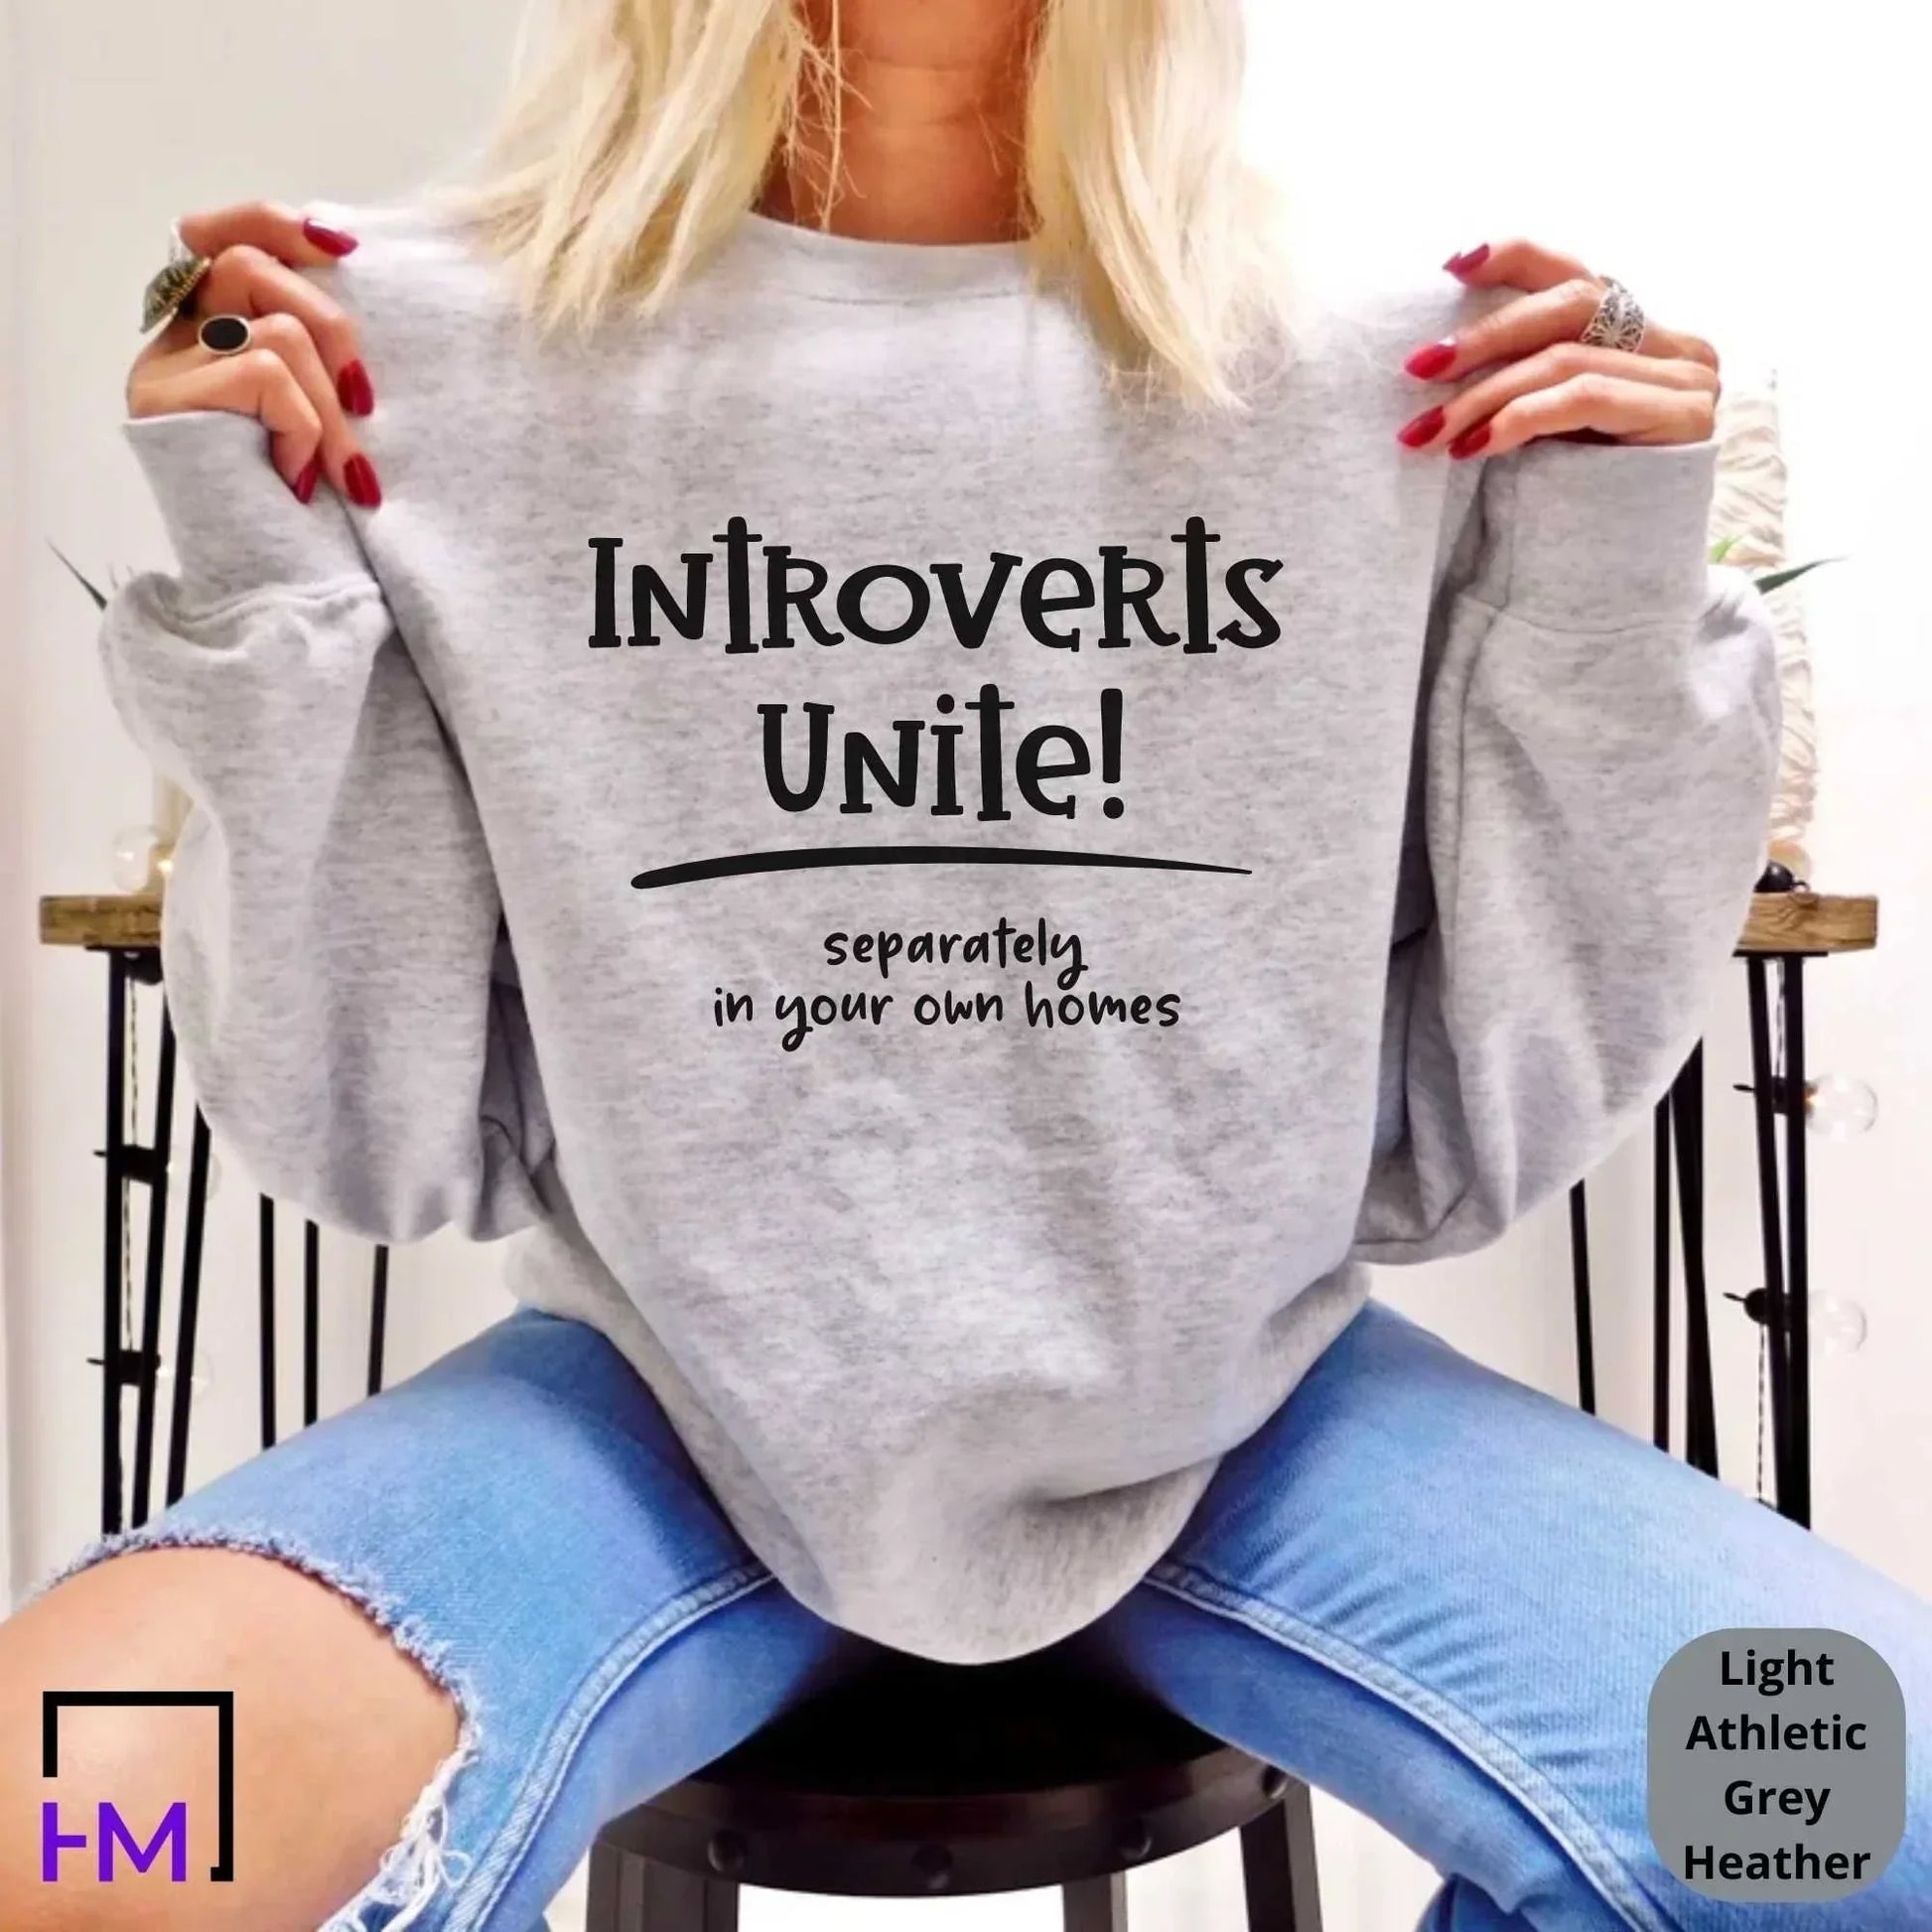 Introvert Shirt, Gift for Introvert, Introverts Unite Shirt, Funny Shirts for Women and Men, Indoorsy Shirt, Antisocial Shirt, Humor Shirt HMDesignStudioUS